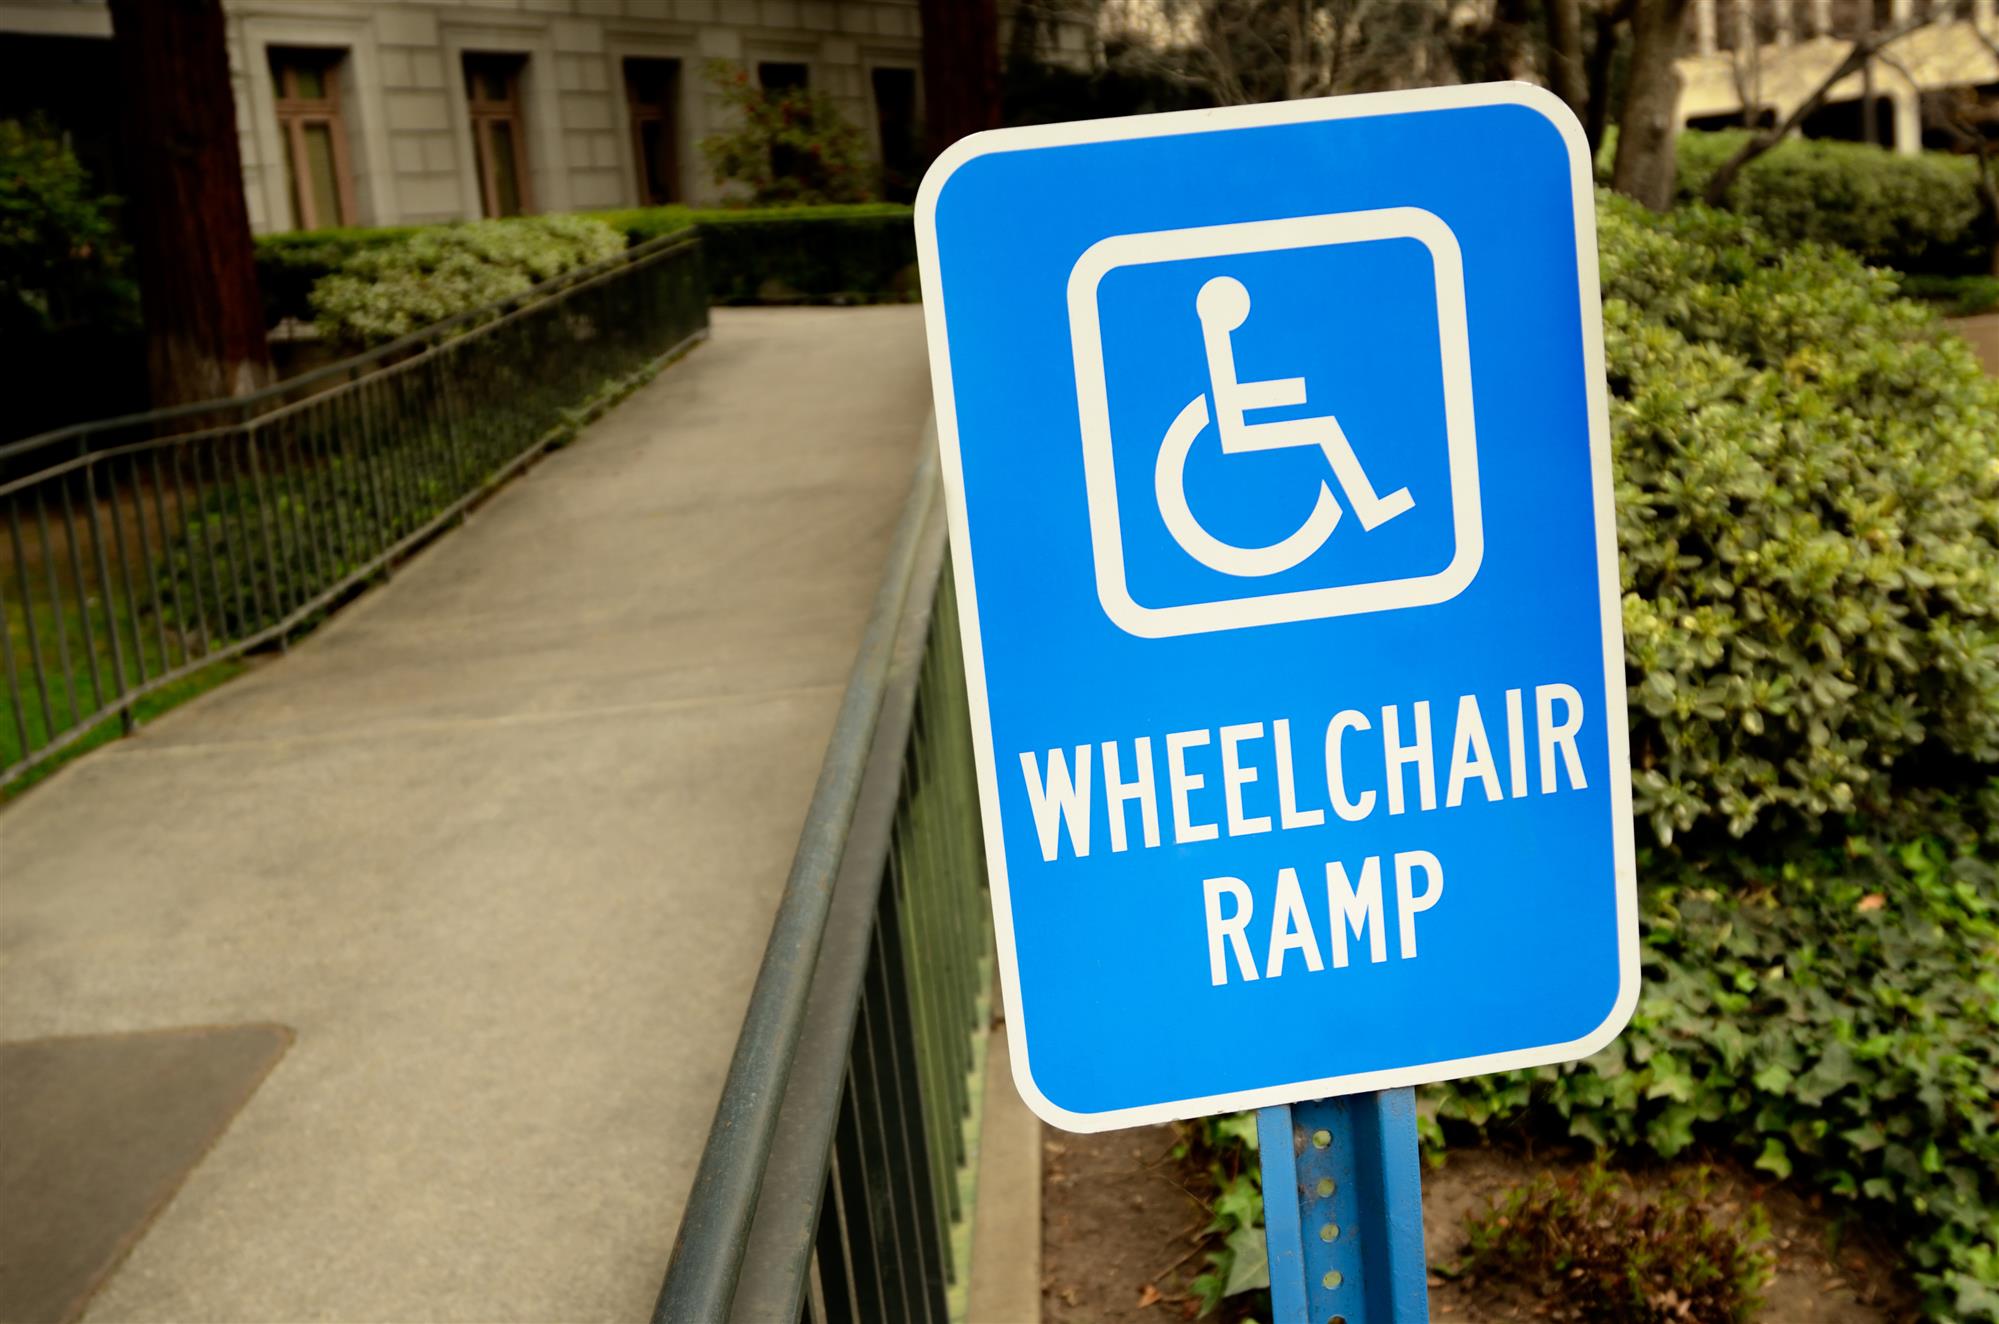 Ada Ramp Requirements, What Are The Ada Requirements For Wheelchair Ramps